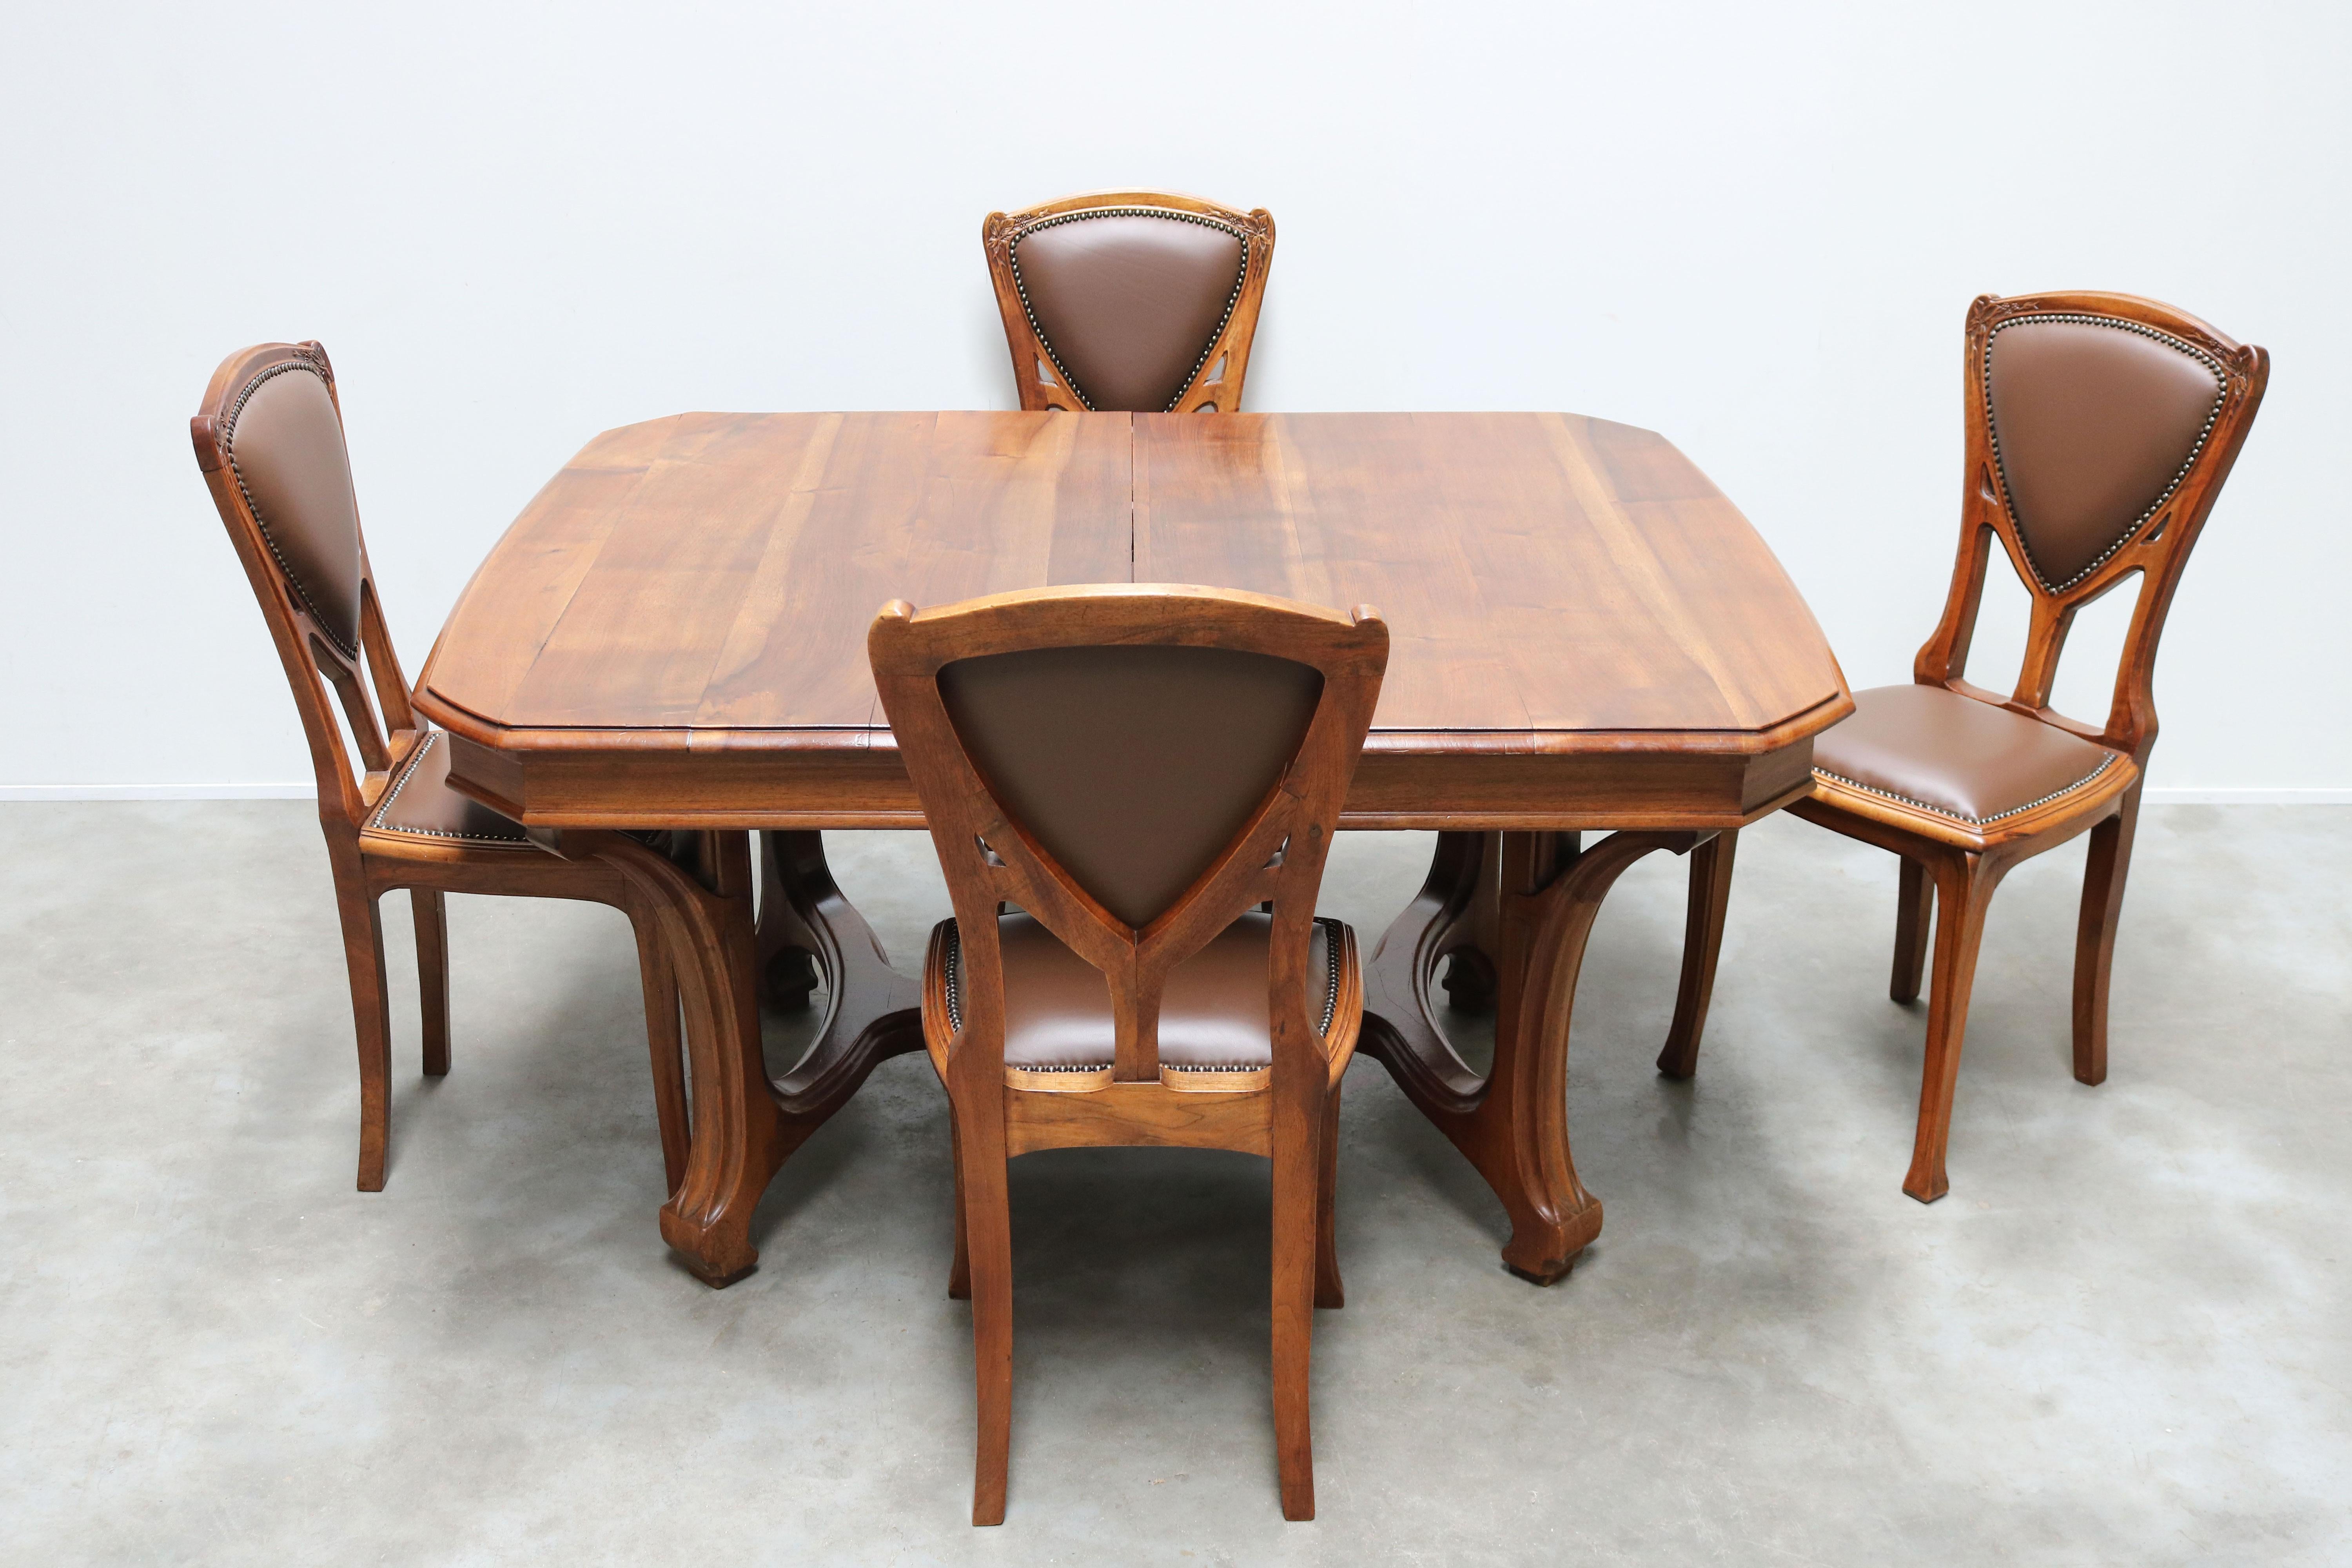 Antique French Art Nouveau Dining Room Set by Eugène Vallin 1903 Table Chairs For Sale 5